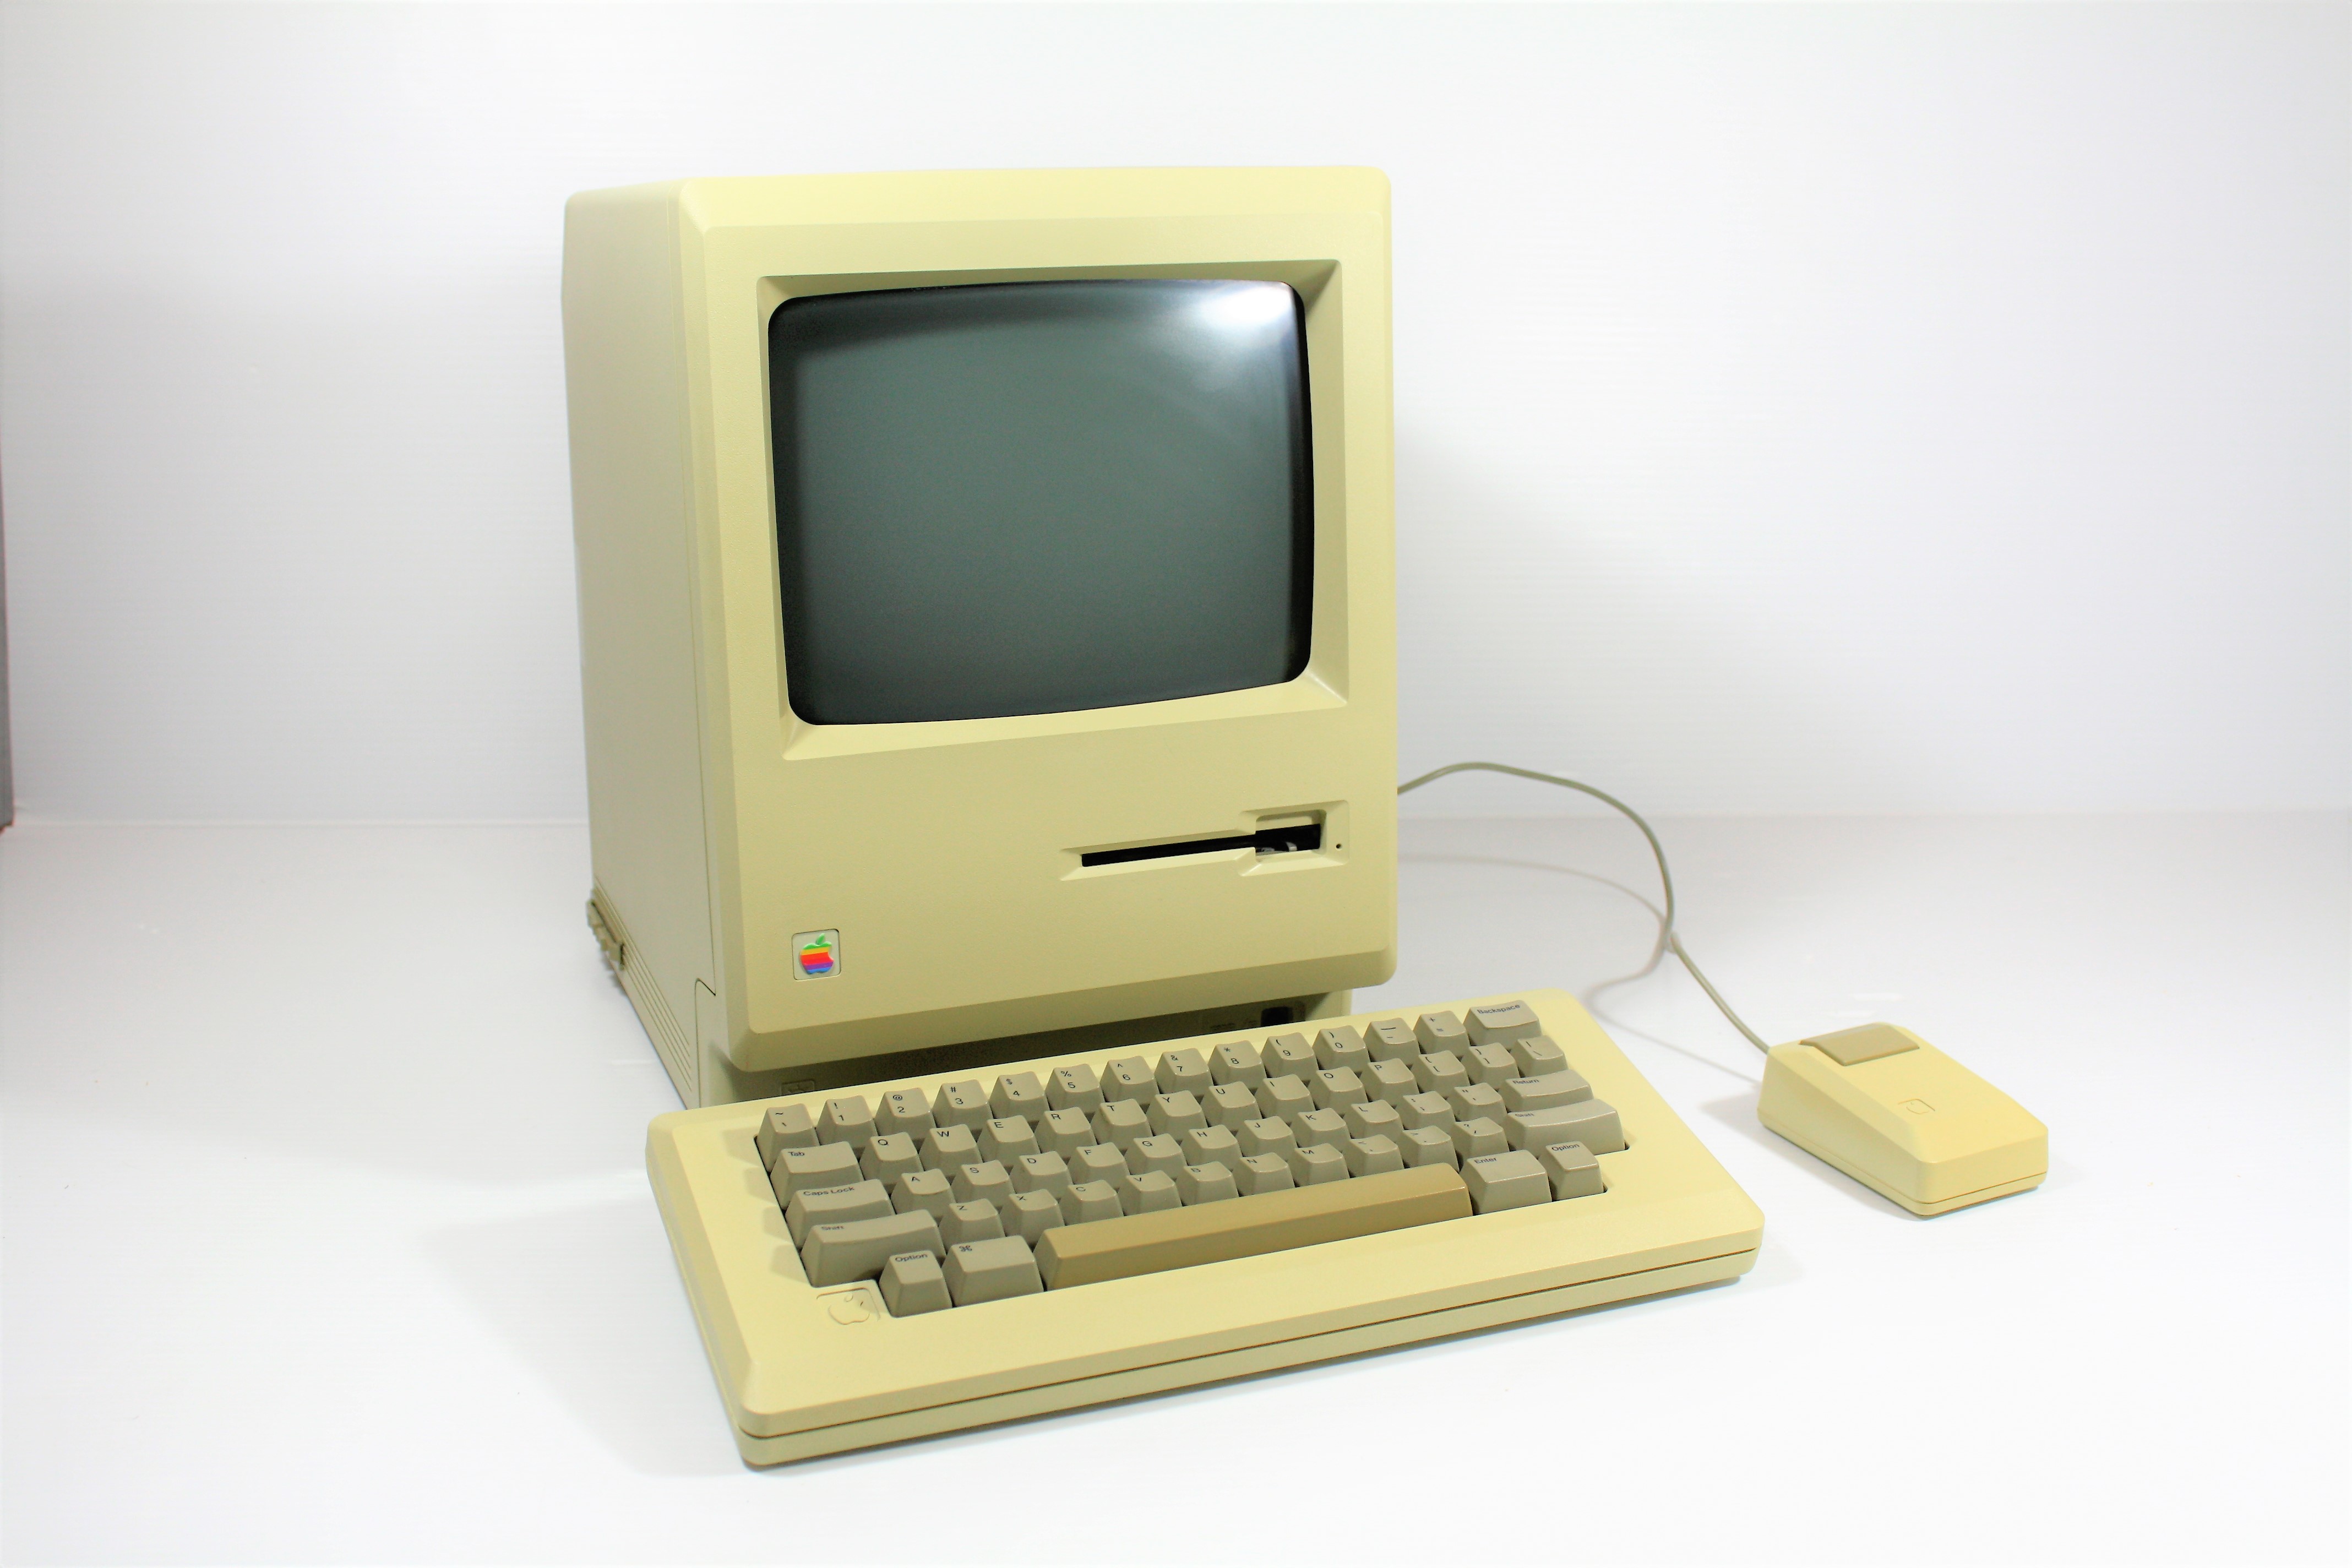 Apple Macintosh 128k upgraded with SCSI and extra memory